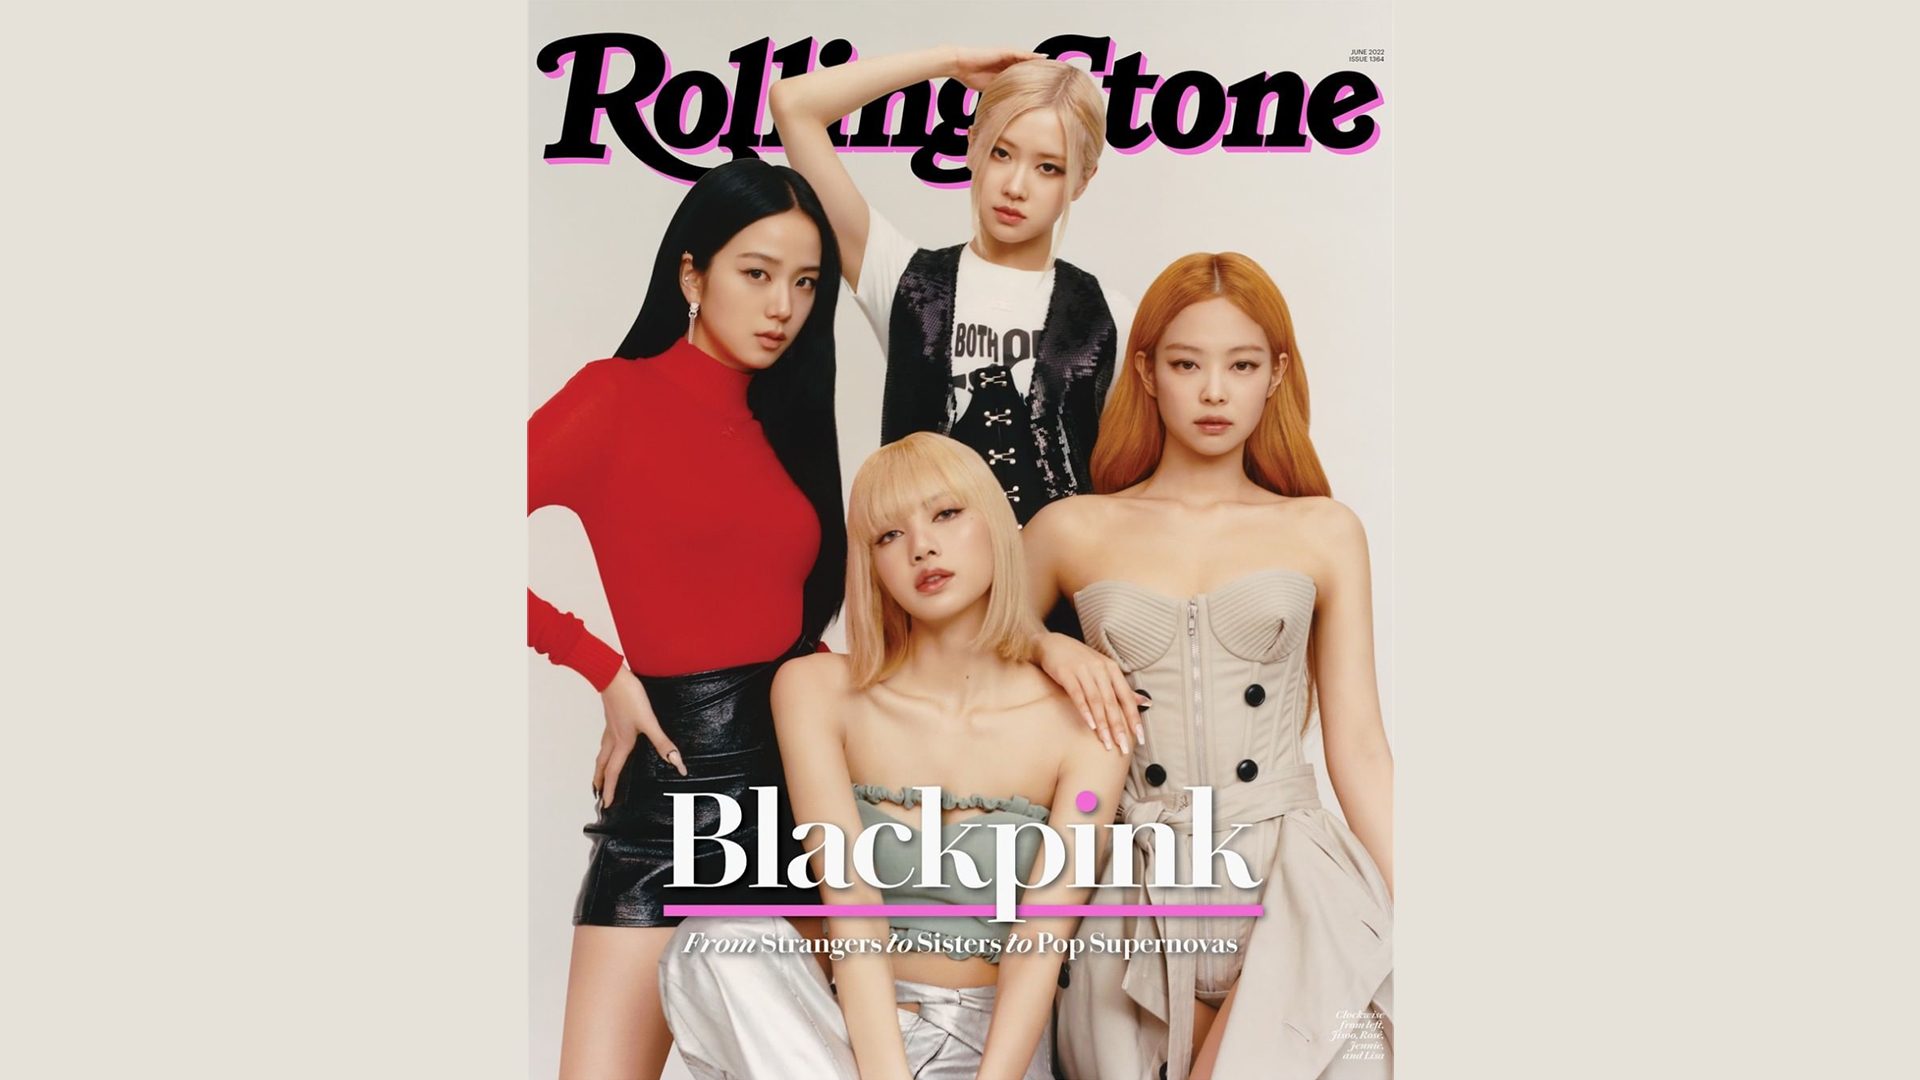 LOOK: BLACKPINK stars on Rolling Stone’s June 2022 cover